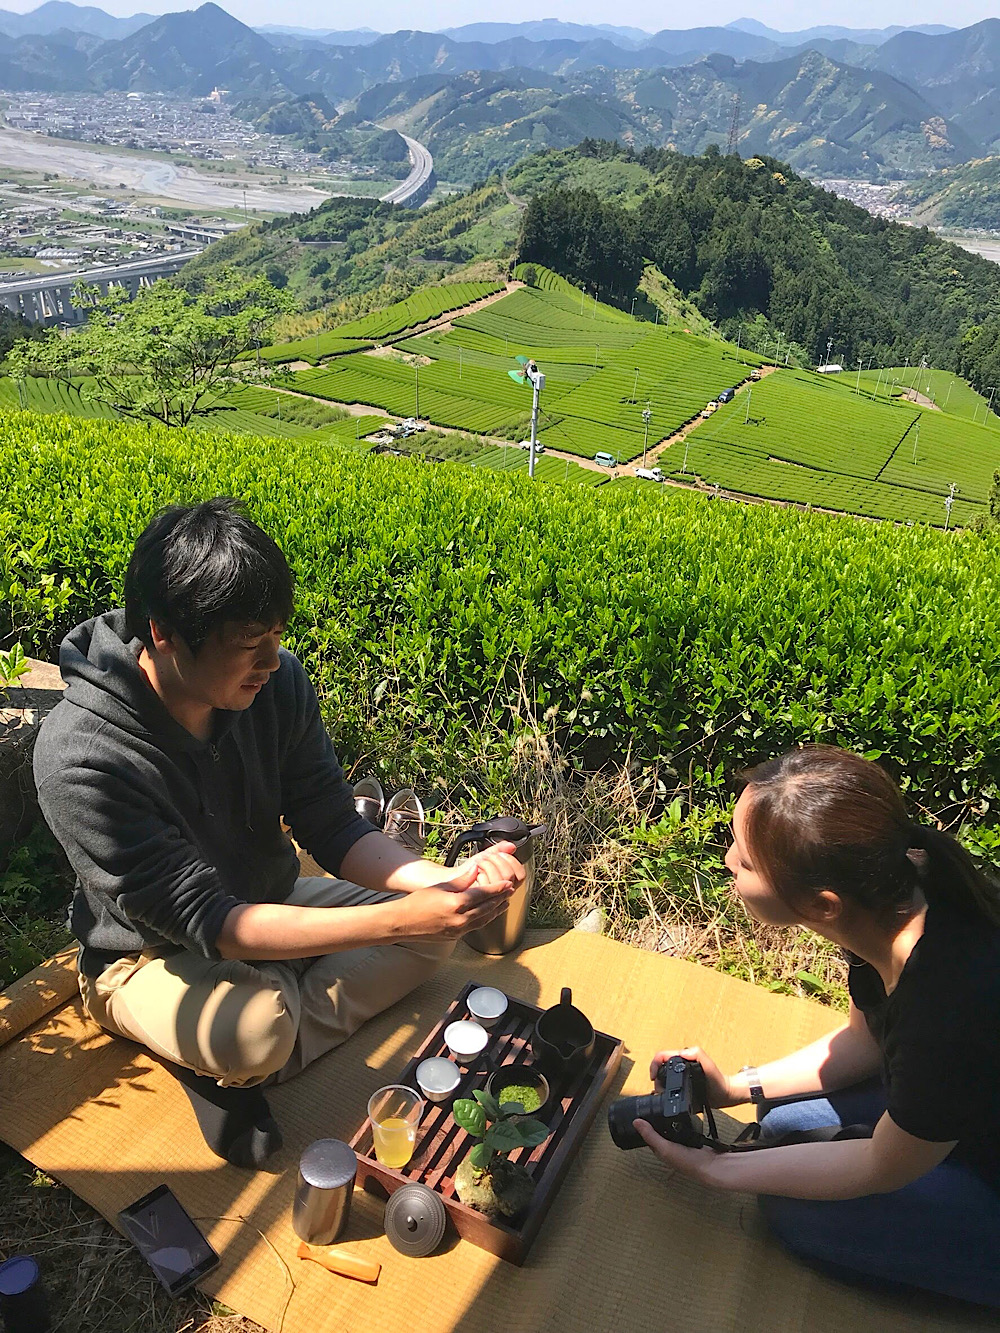 Hidden Gem Tea Farm Tour in Shizuoka located in between Tokyo and Kyoto. Beautiful tea plantations. A day trip from Tokyo.